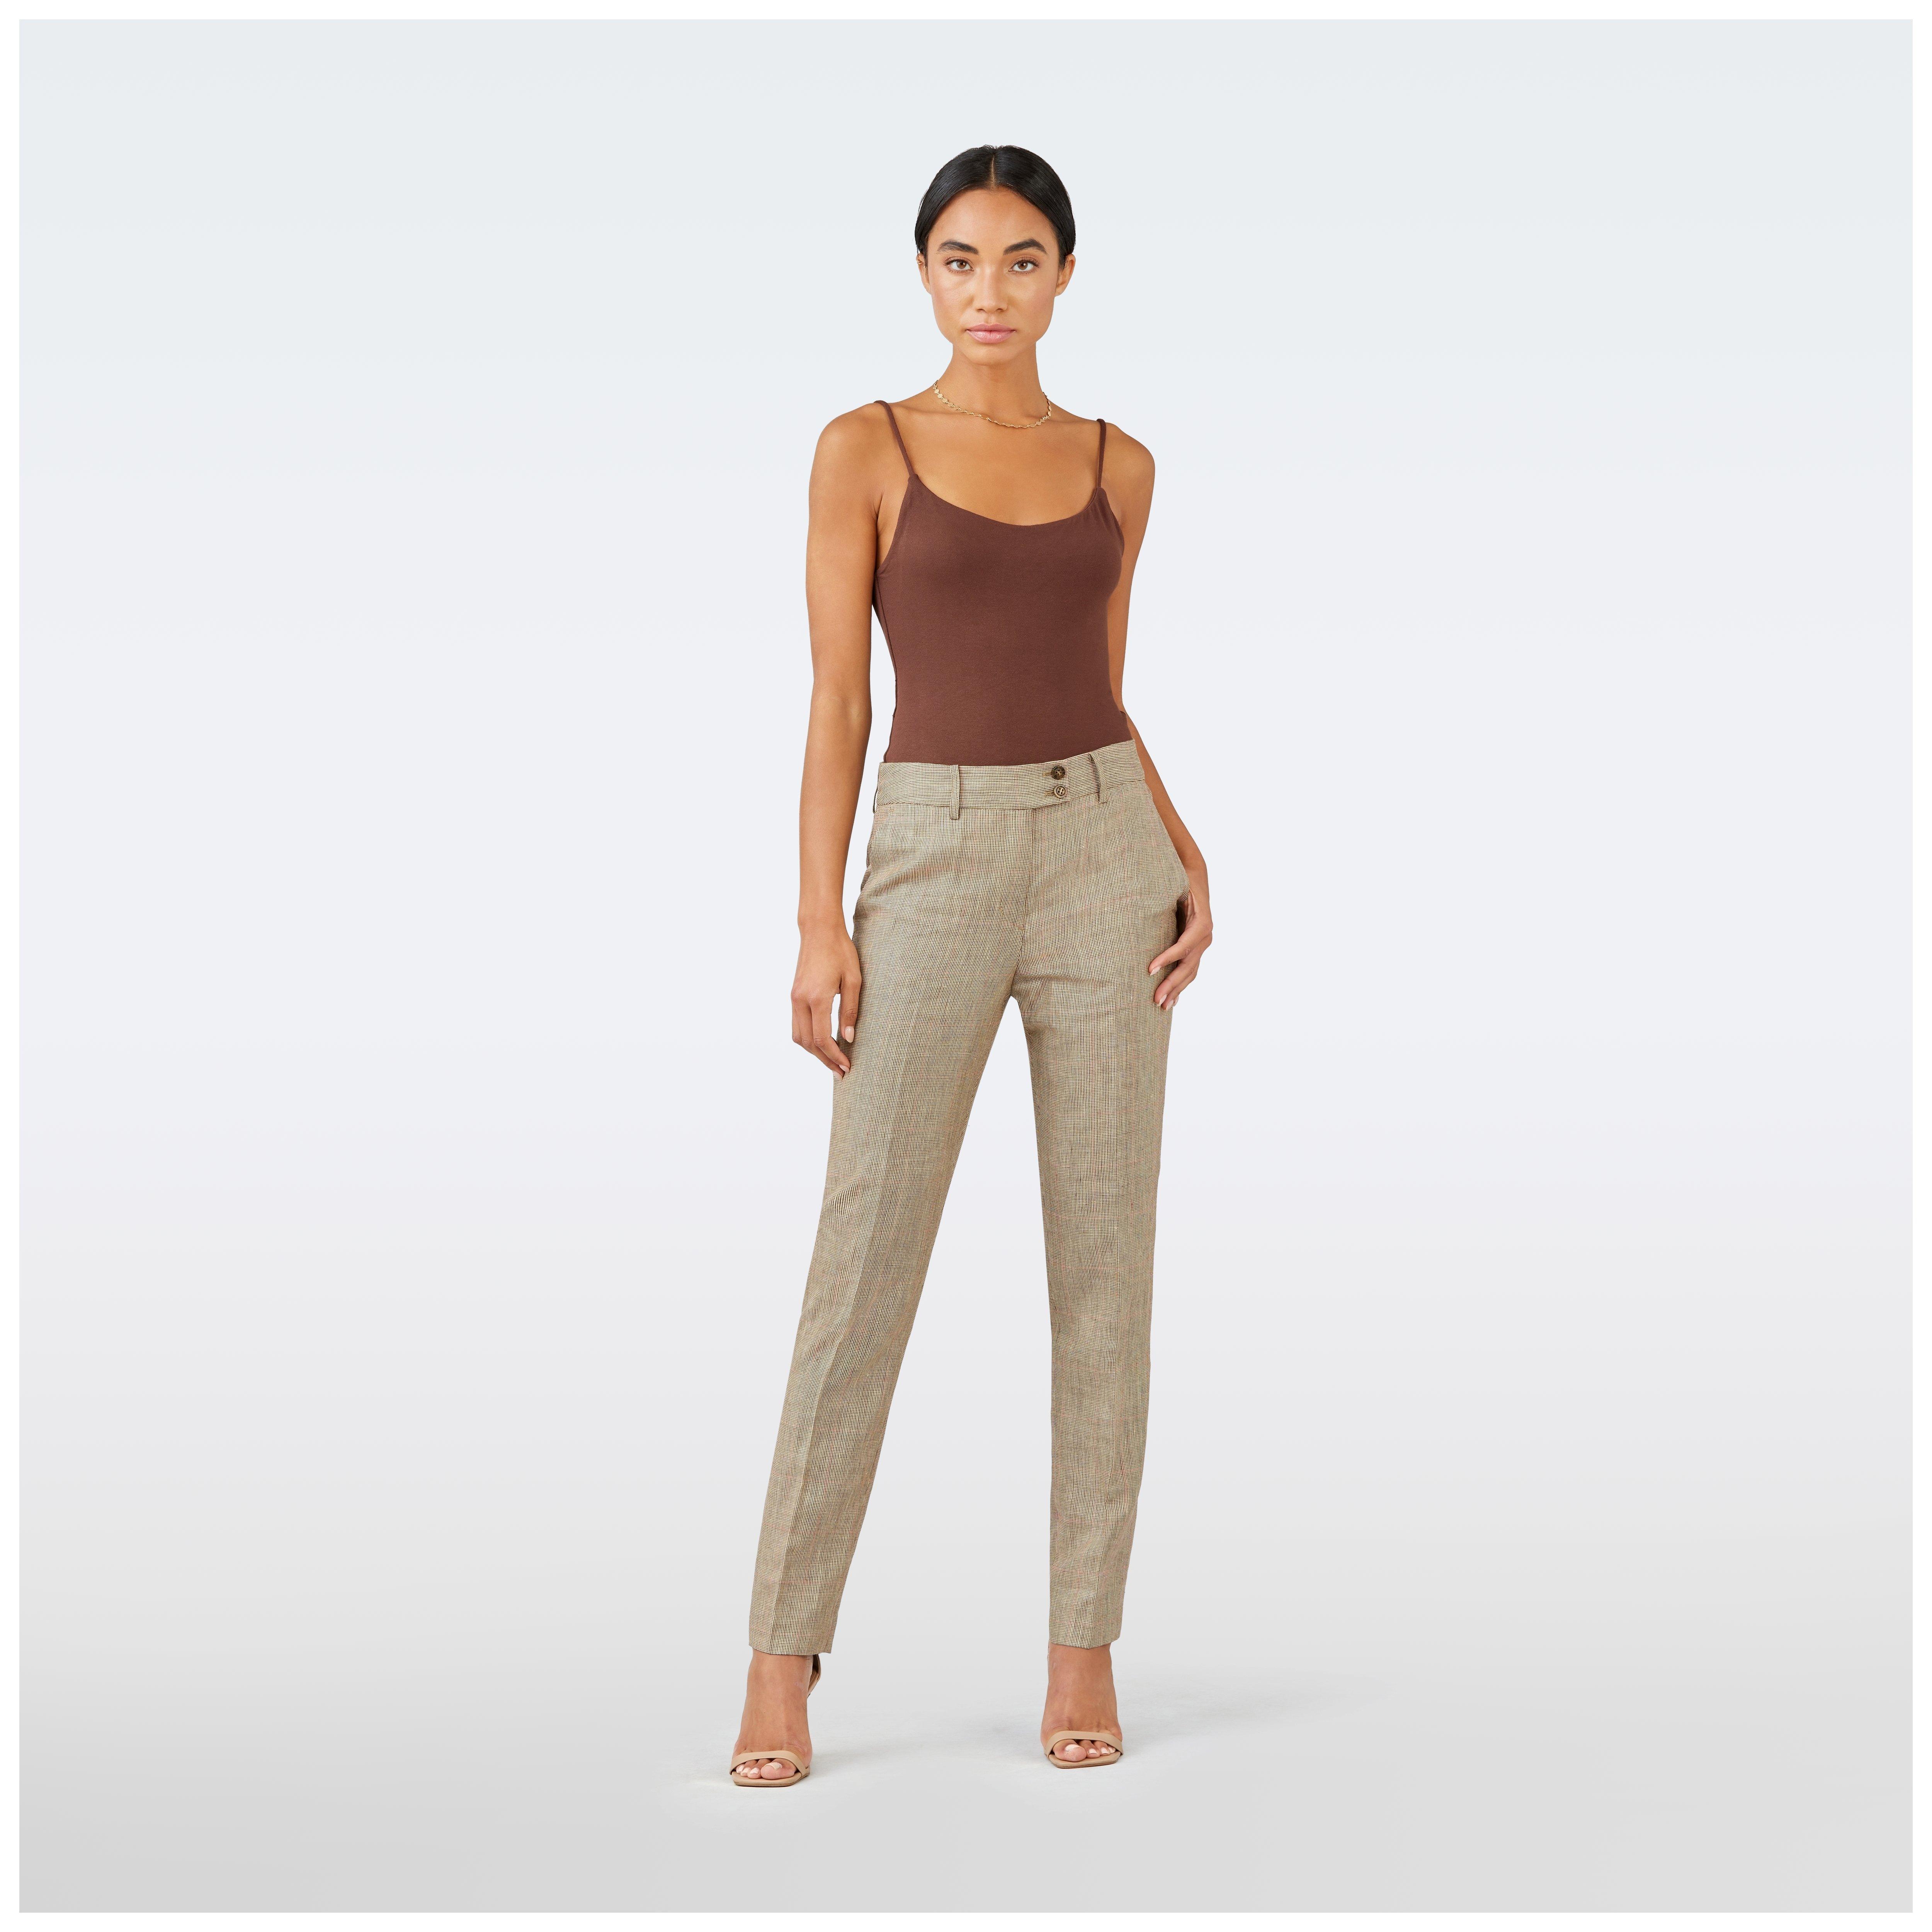 NR Roma Plain Ladies Brown Trousers at Rs 420/piece in Mumbai | ID:  22827279088